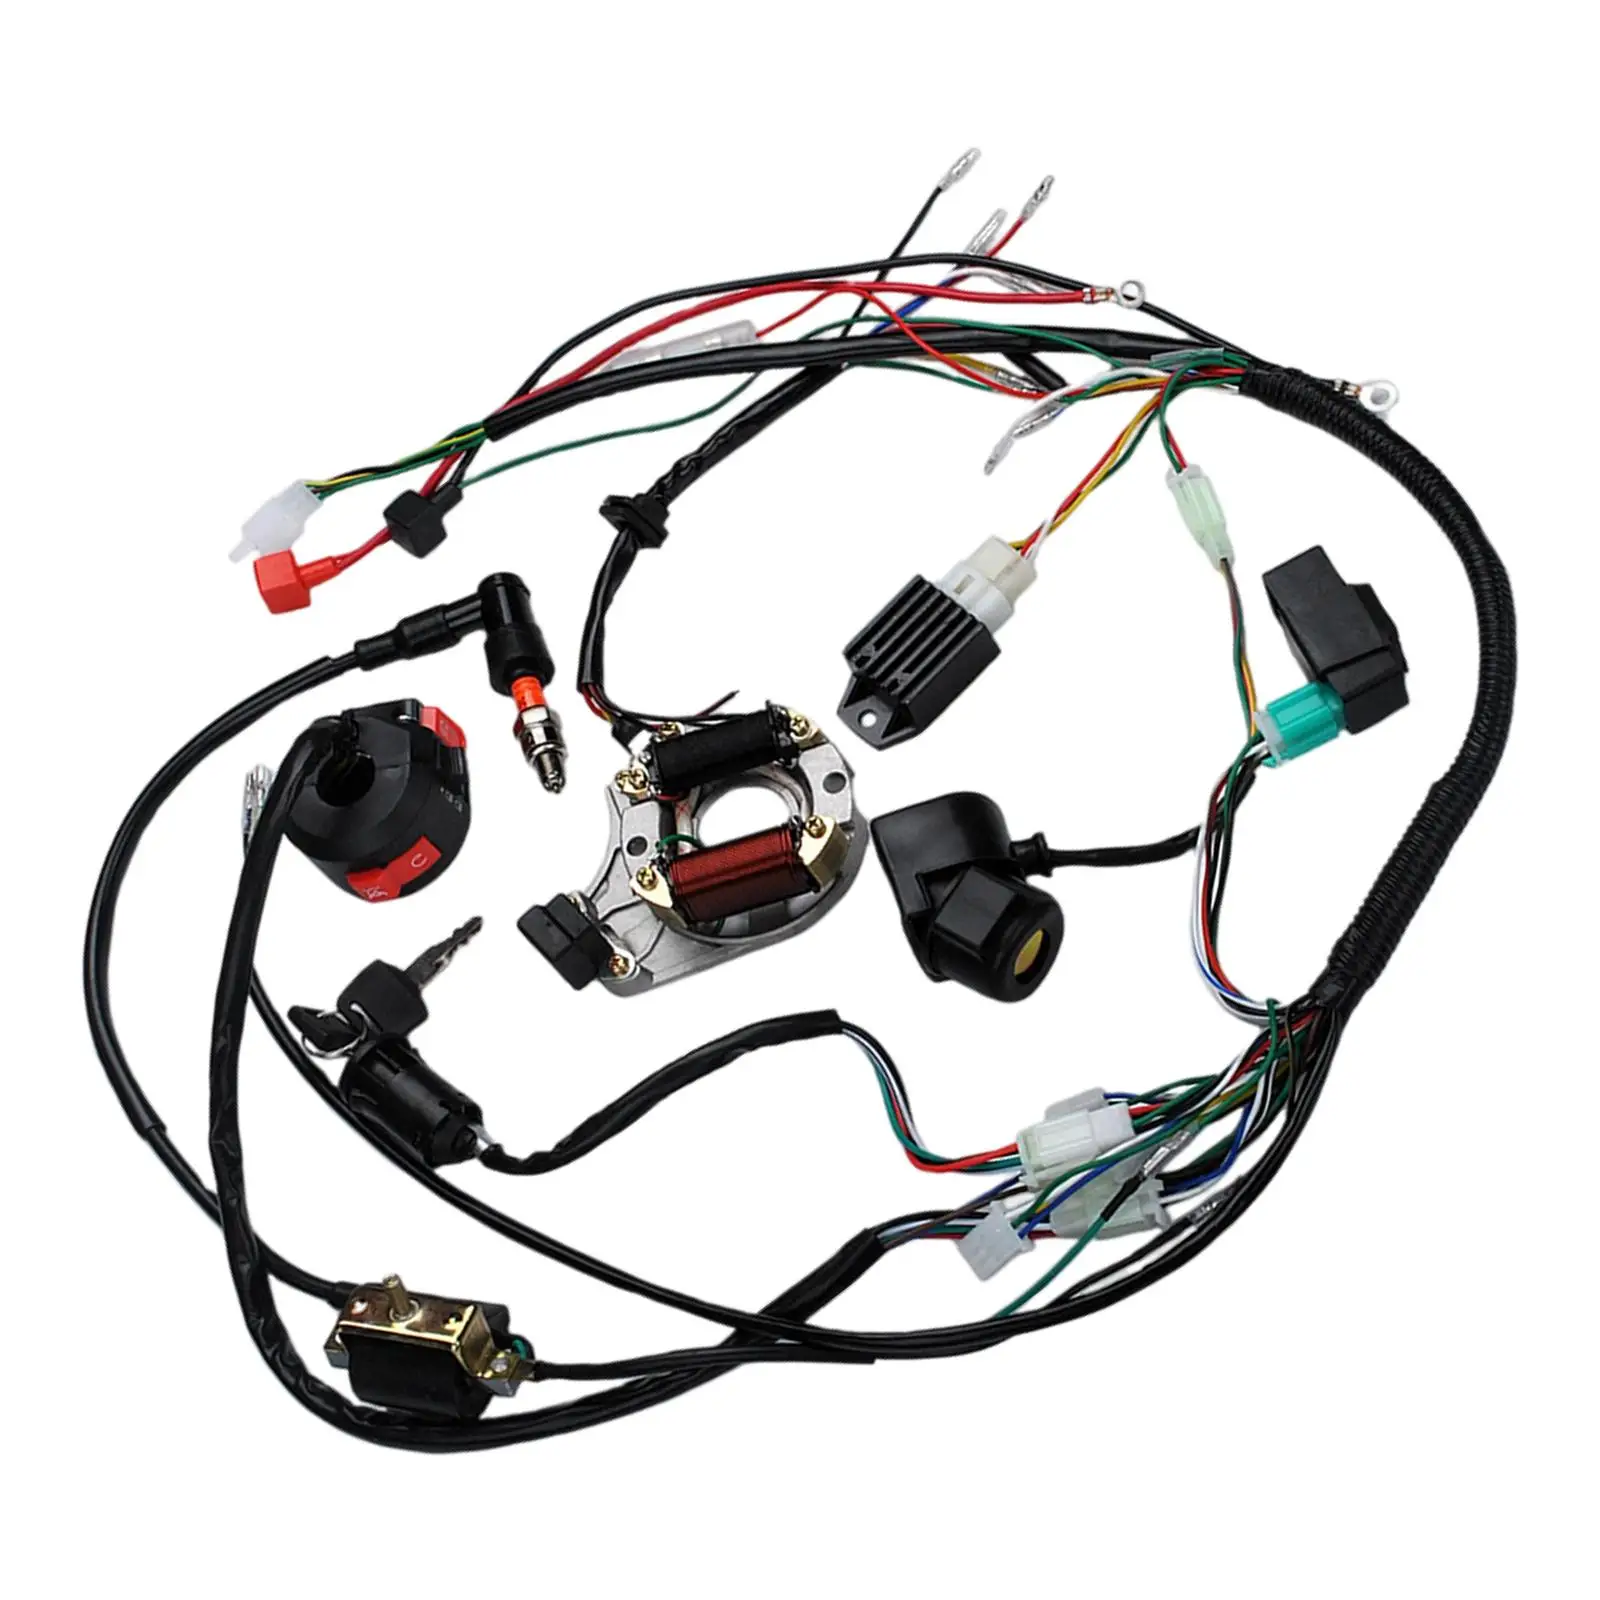 Complete Electrics Wire Harness Kit Solenoid Relay Coil for Dirt Bike Scooter Buggy 4 Wheelers Stroke 50cc 70cc 110cc 125cc